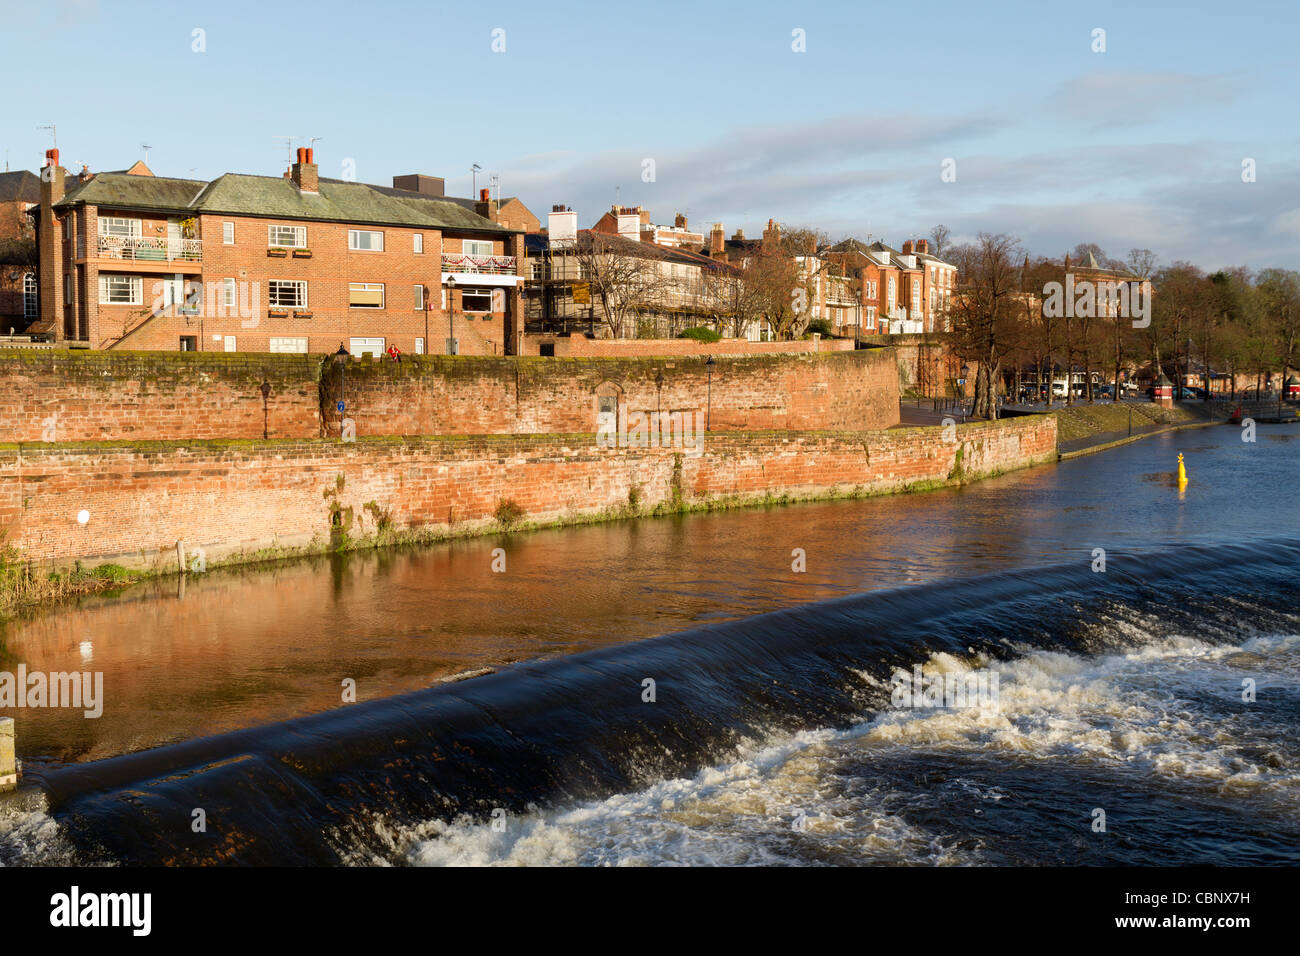 The old city walls along the river front in Chester Stock Photo